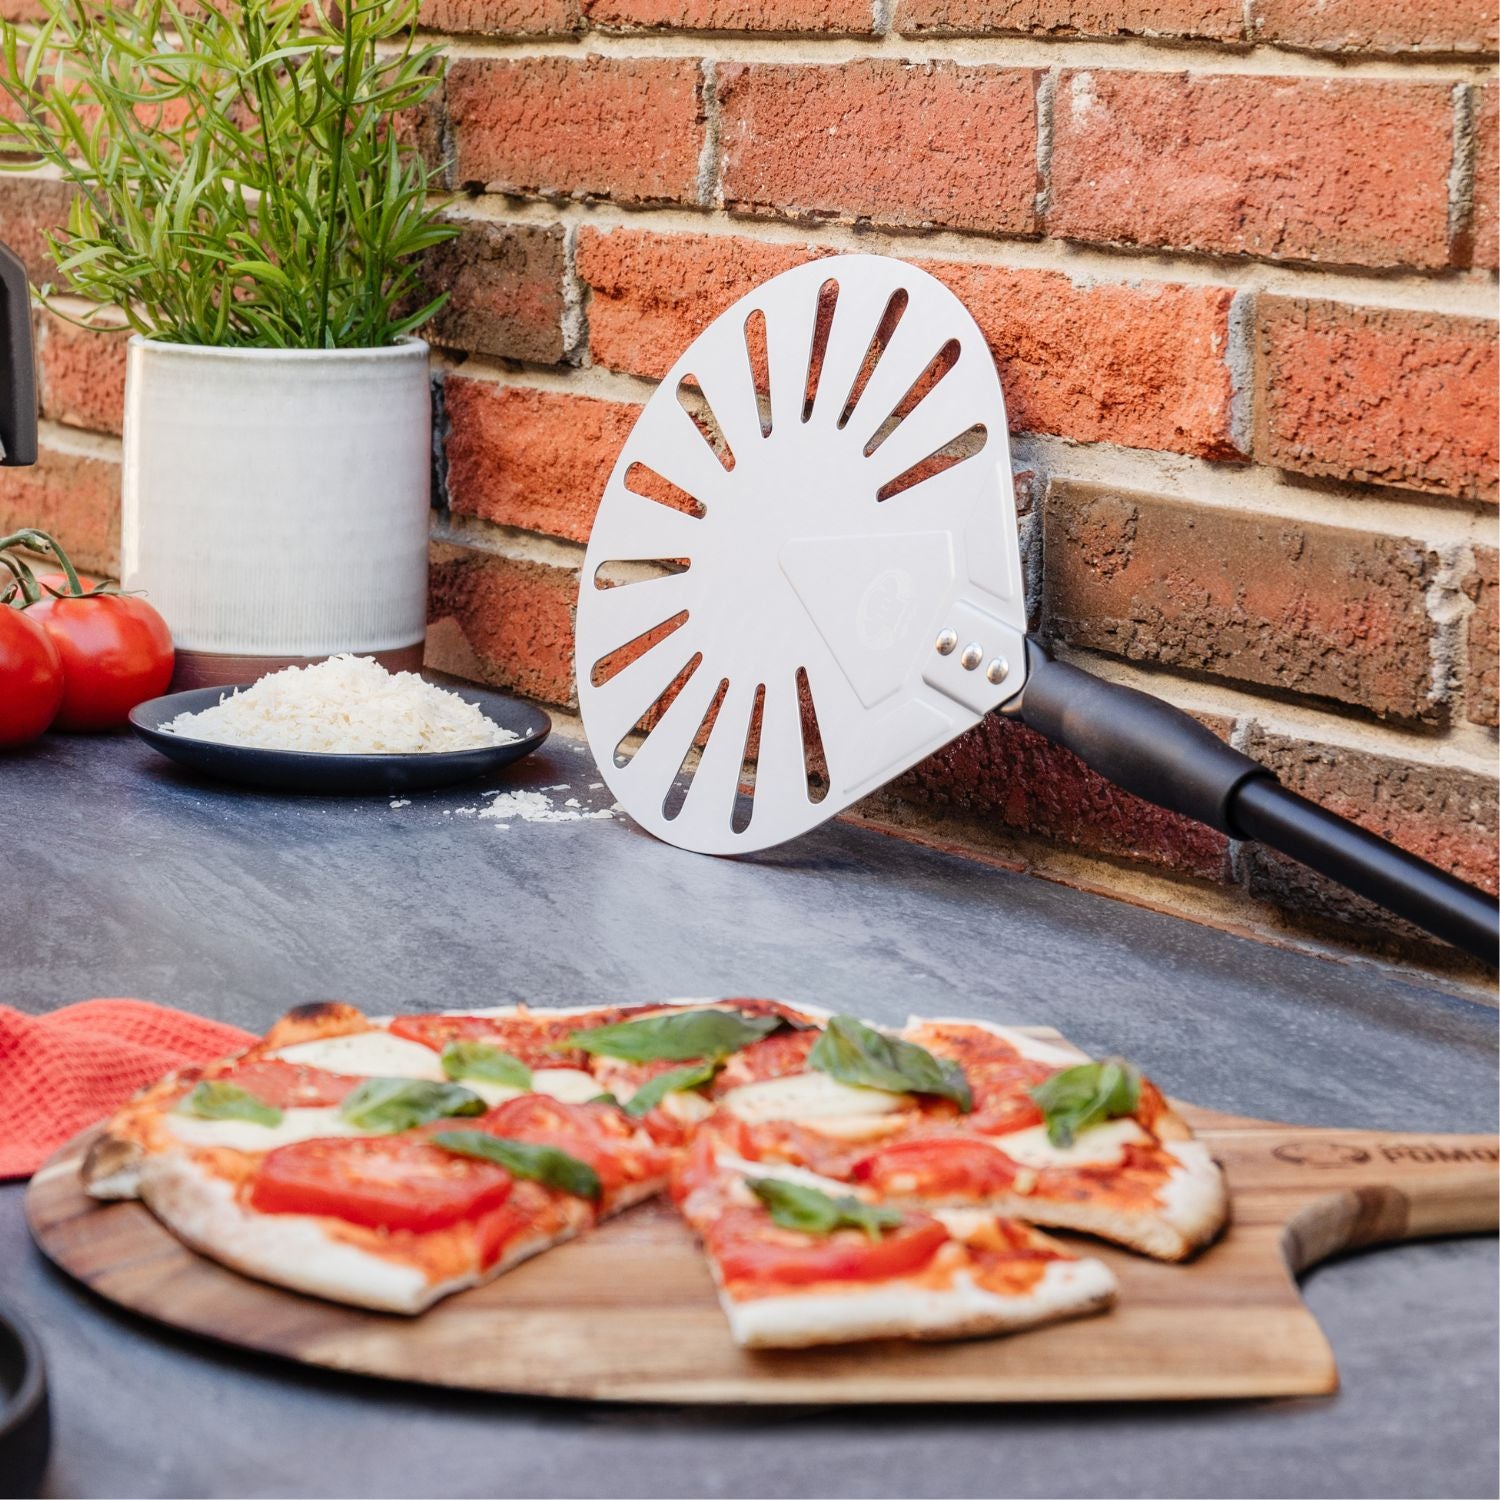 Perforated Aluminum Long Extendable Pizza Peel - 49-Inch Handle – Chef  Pomodoro